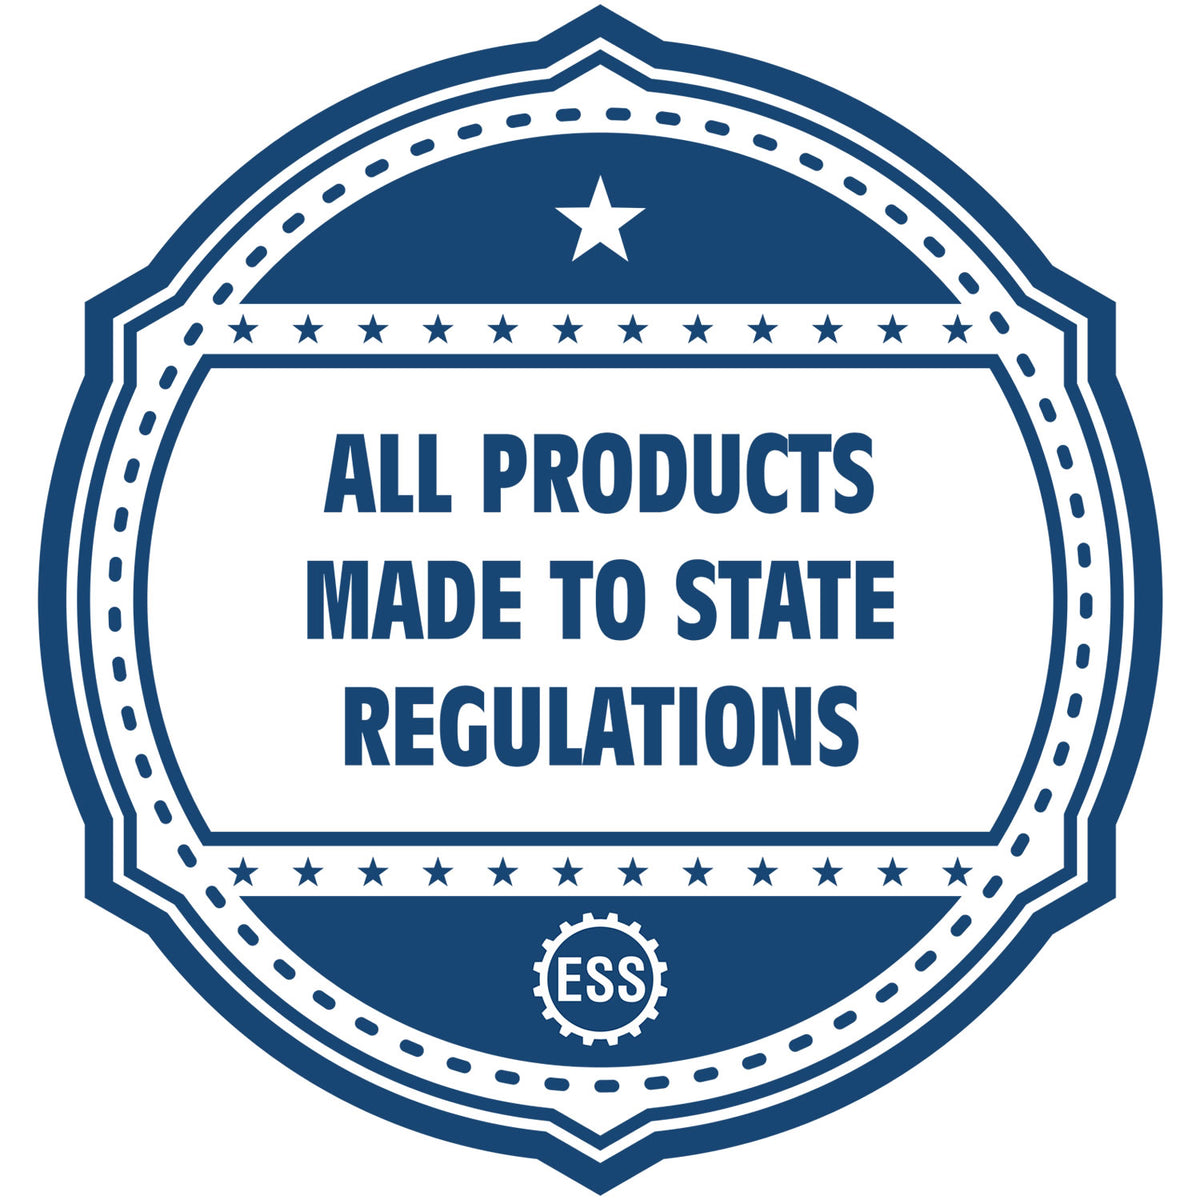 An icon or badge element for the Self-Inking Iowa Landscape Architect Stamp showing that this product is made in compliance with state regulations.